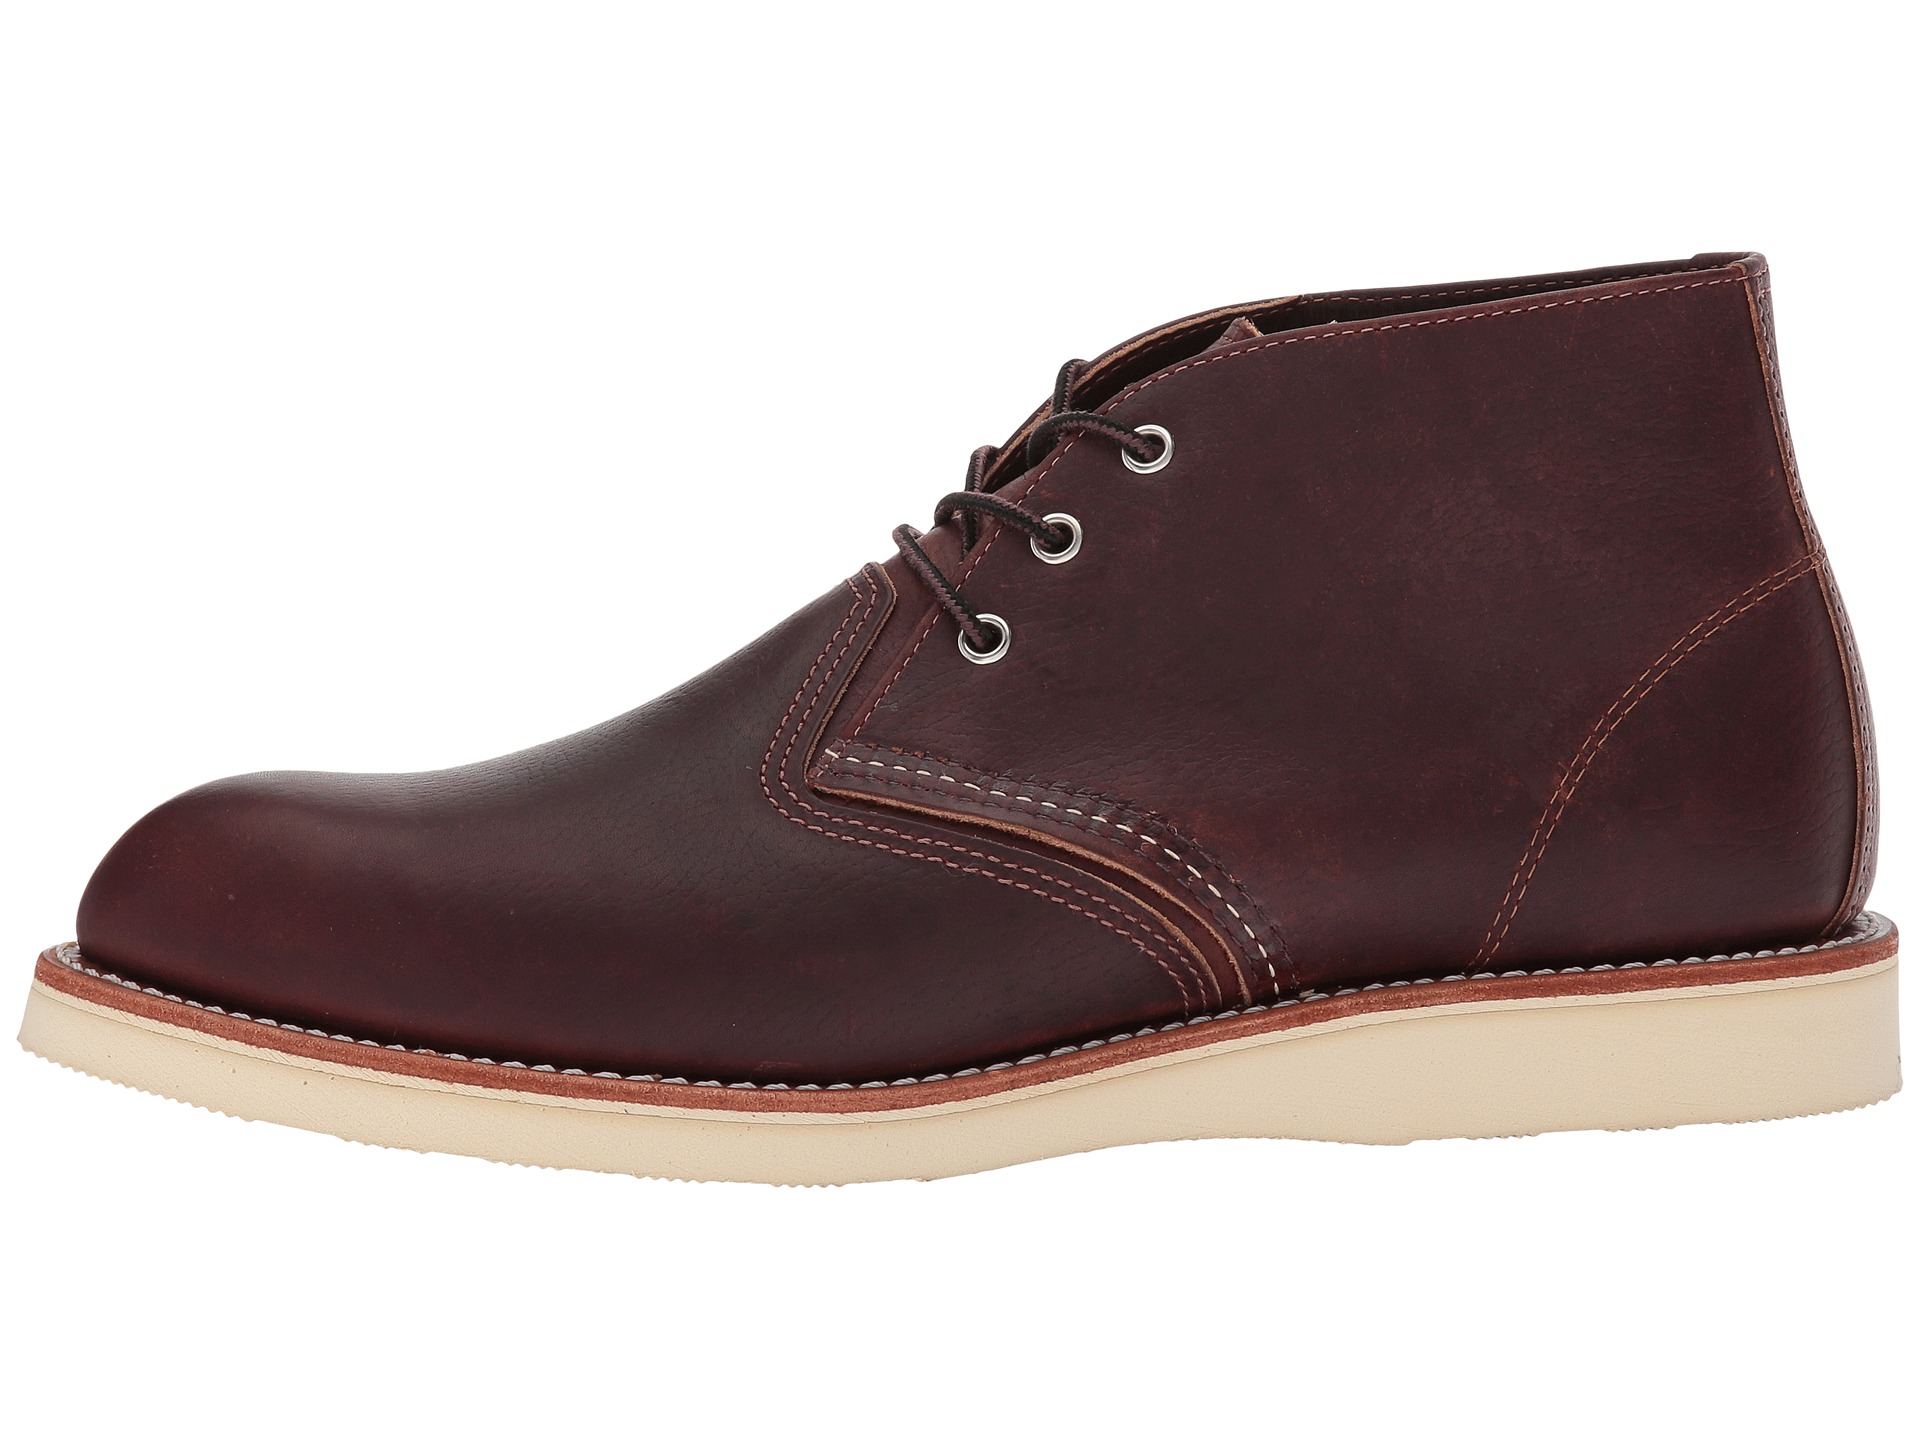 Red Wing Heritage Work Chukka at Zappos.com